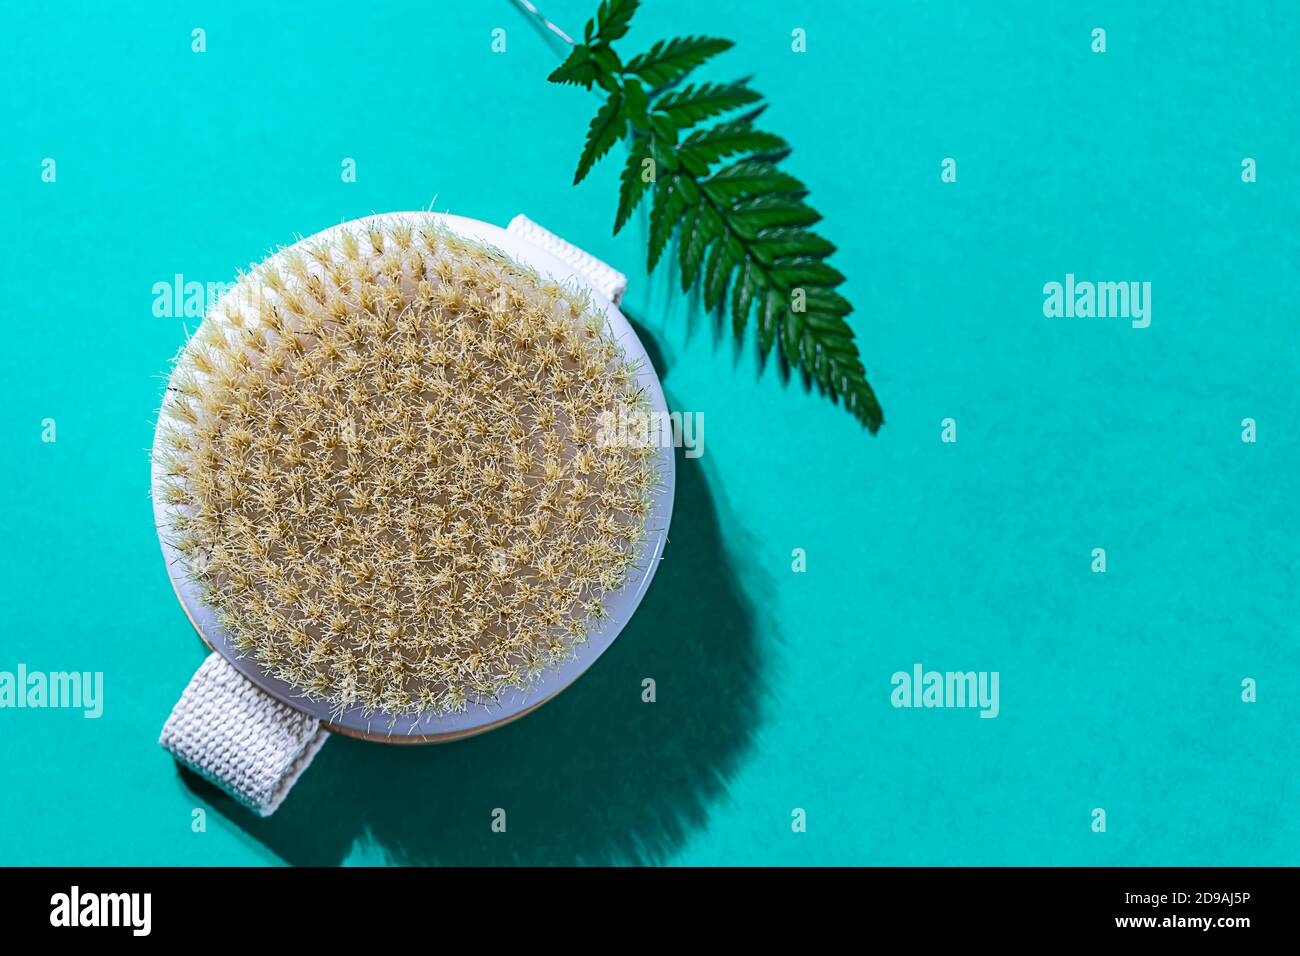 Natural organic wooden body massage brush, towel, fern leaves with natural sunlight. Home Spa Therapy. Stock Photo